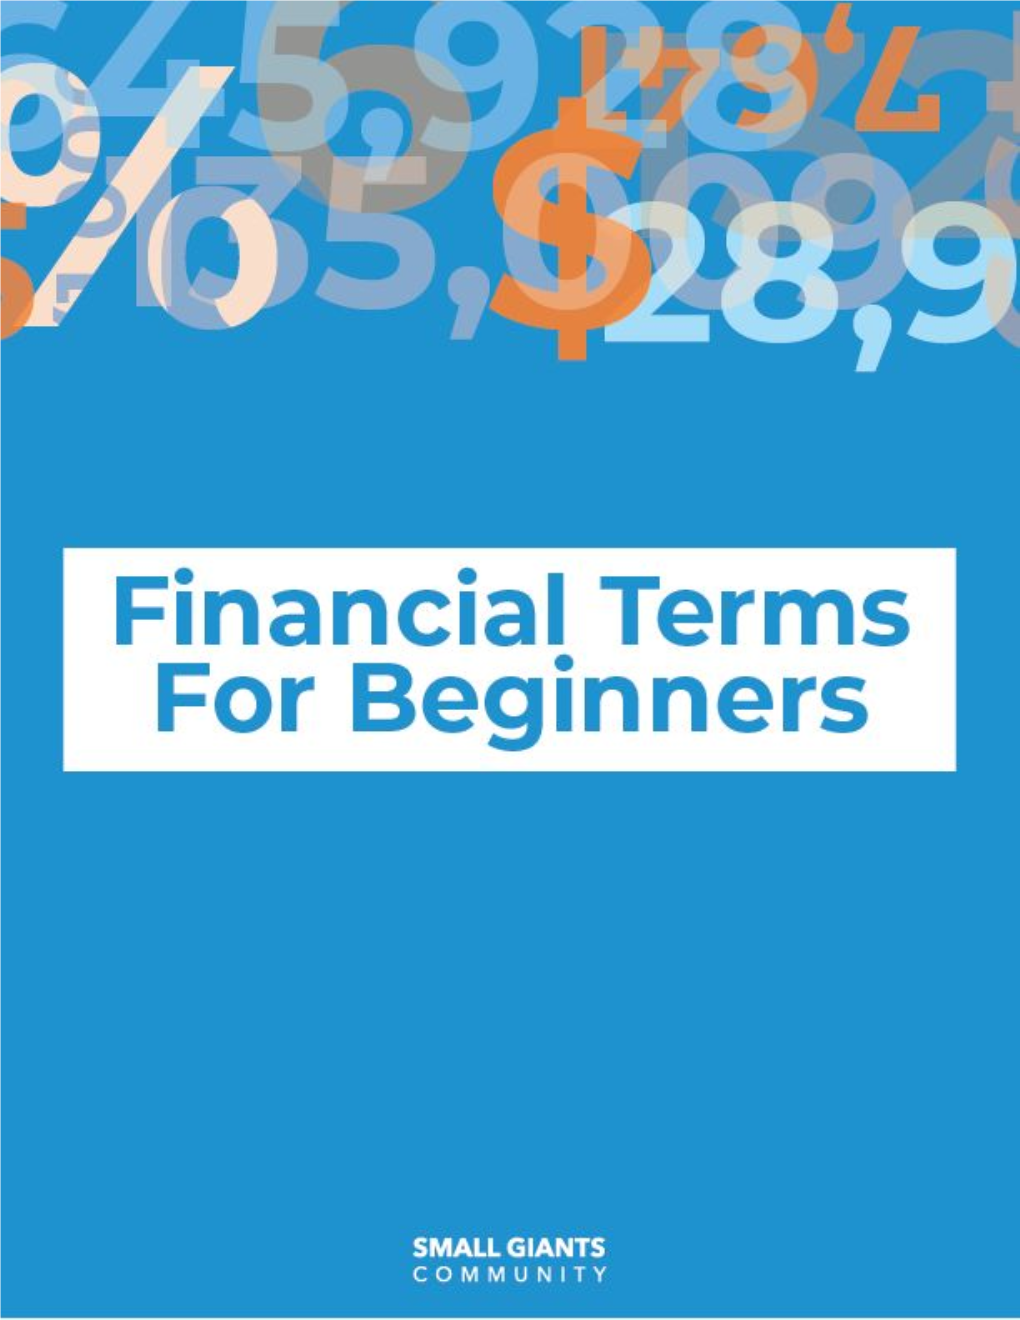 Financial Terms for Beginners.Pdf